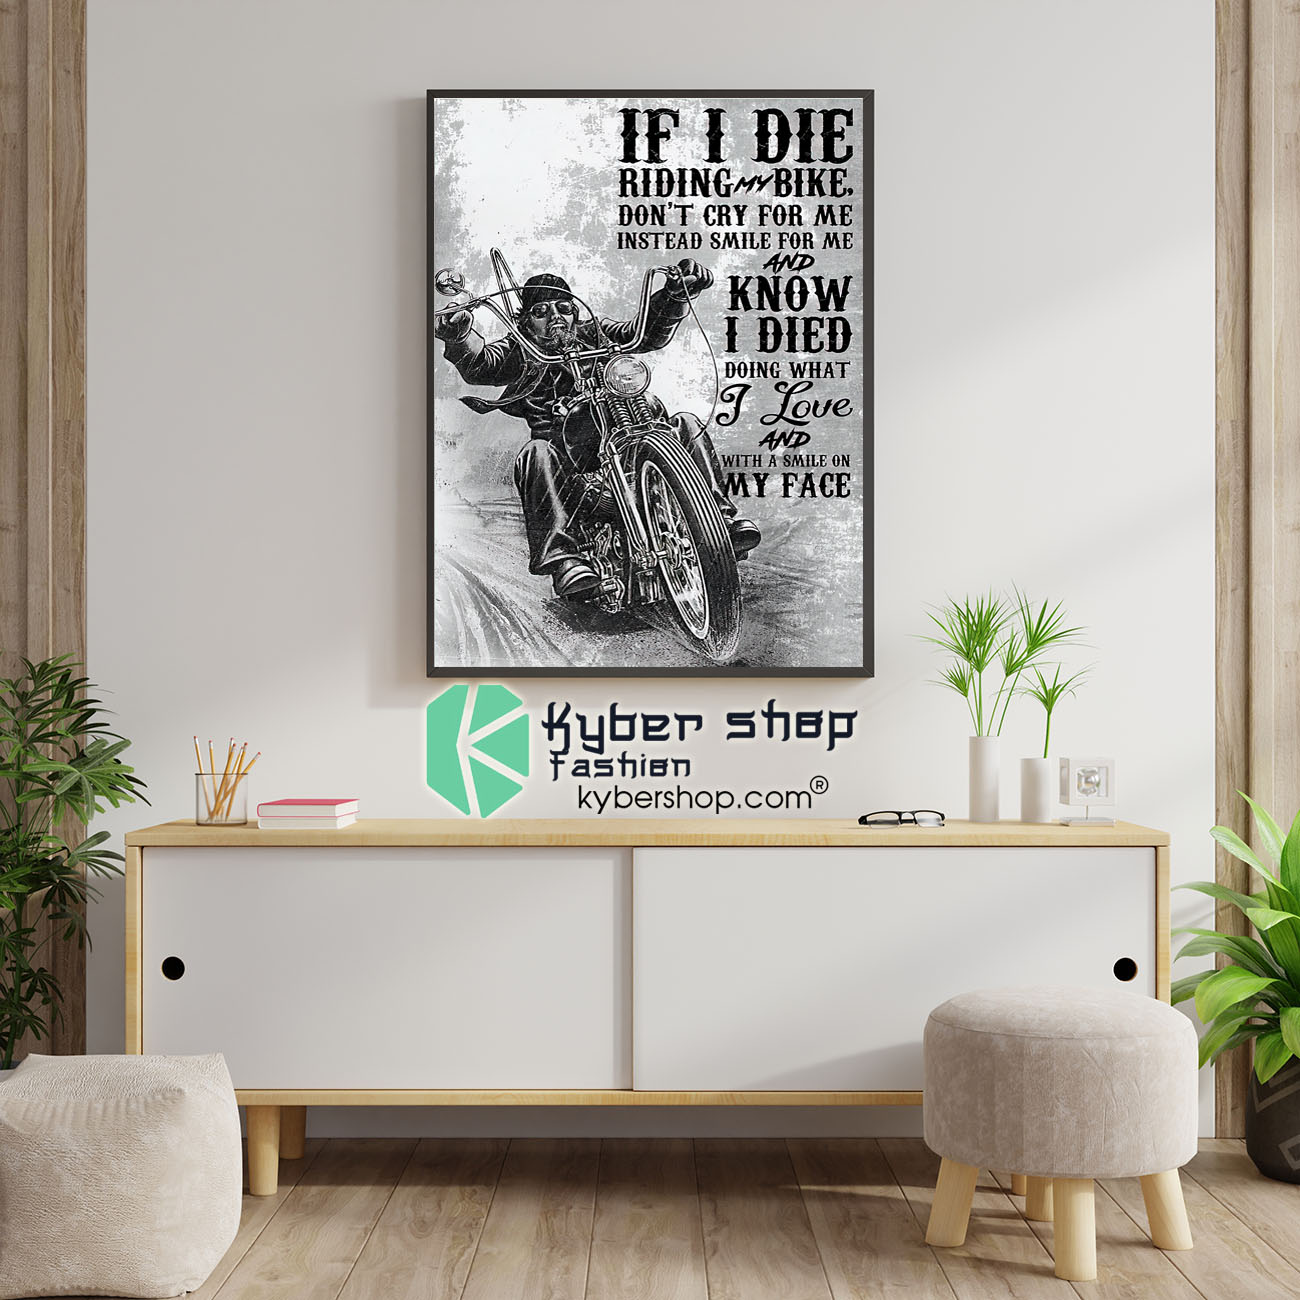 If I die riding my bike dont cry for me instead smile for me and know i died poster 1